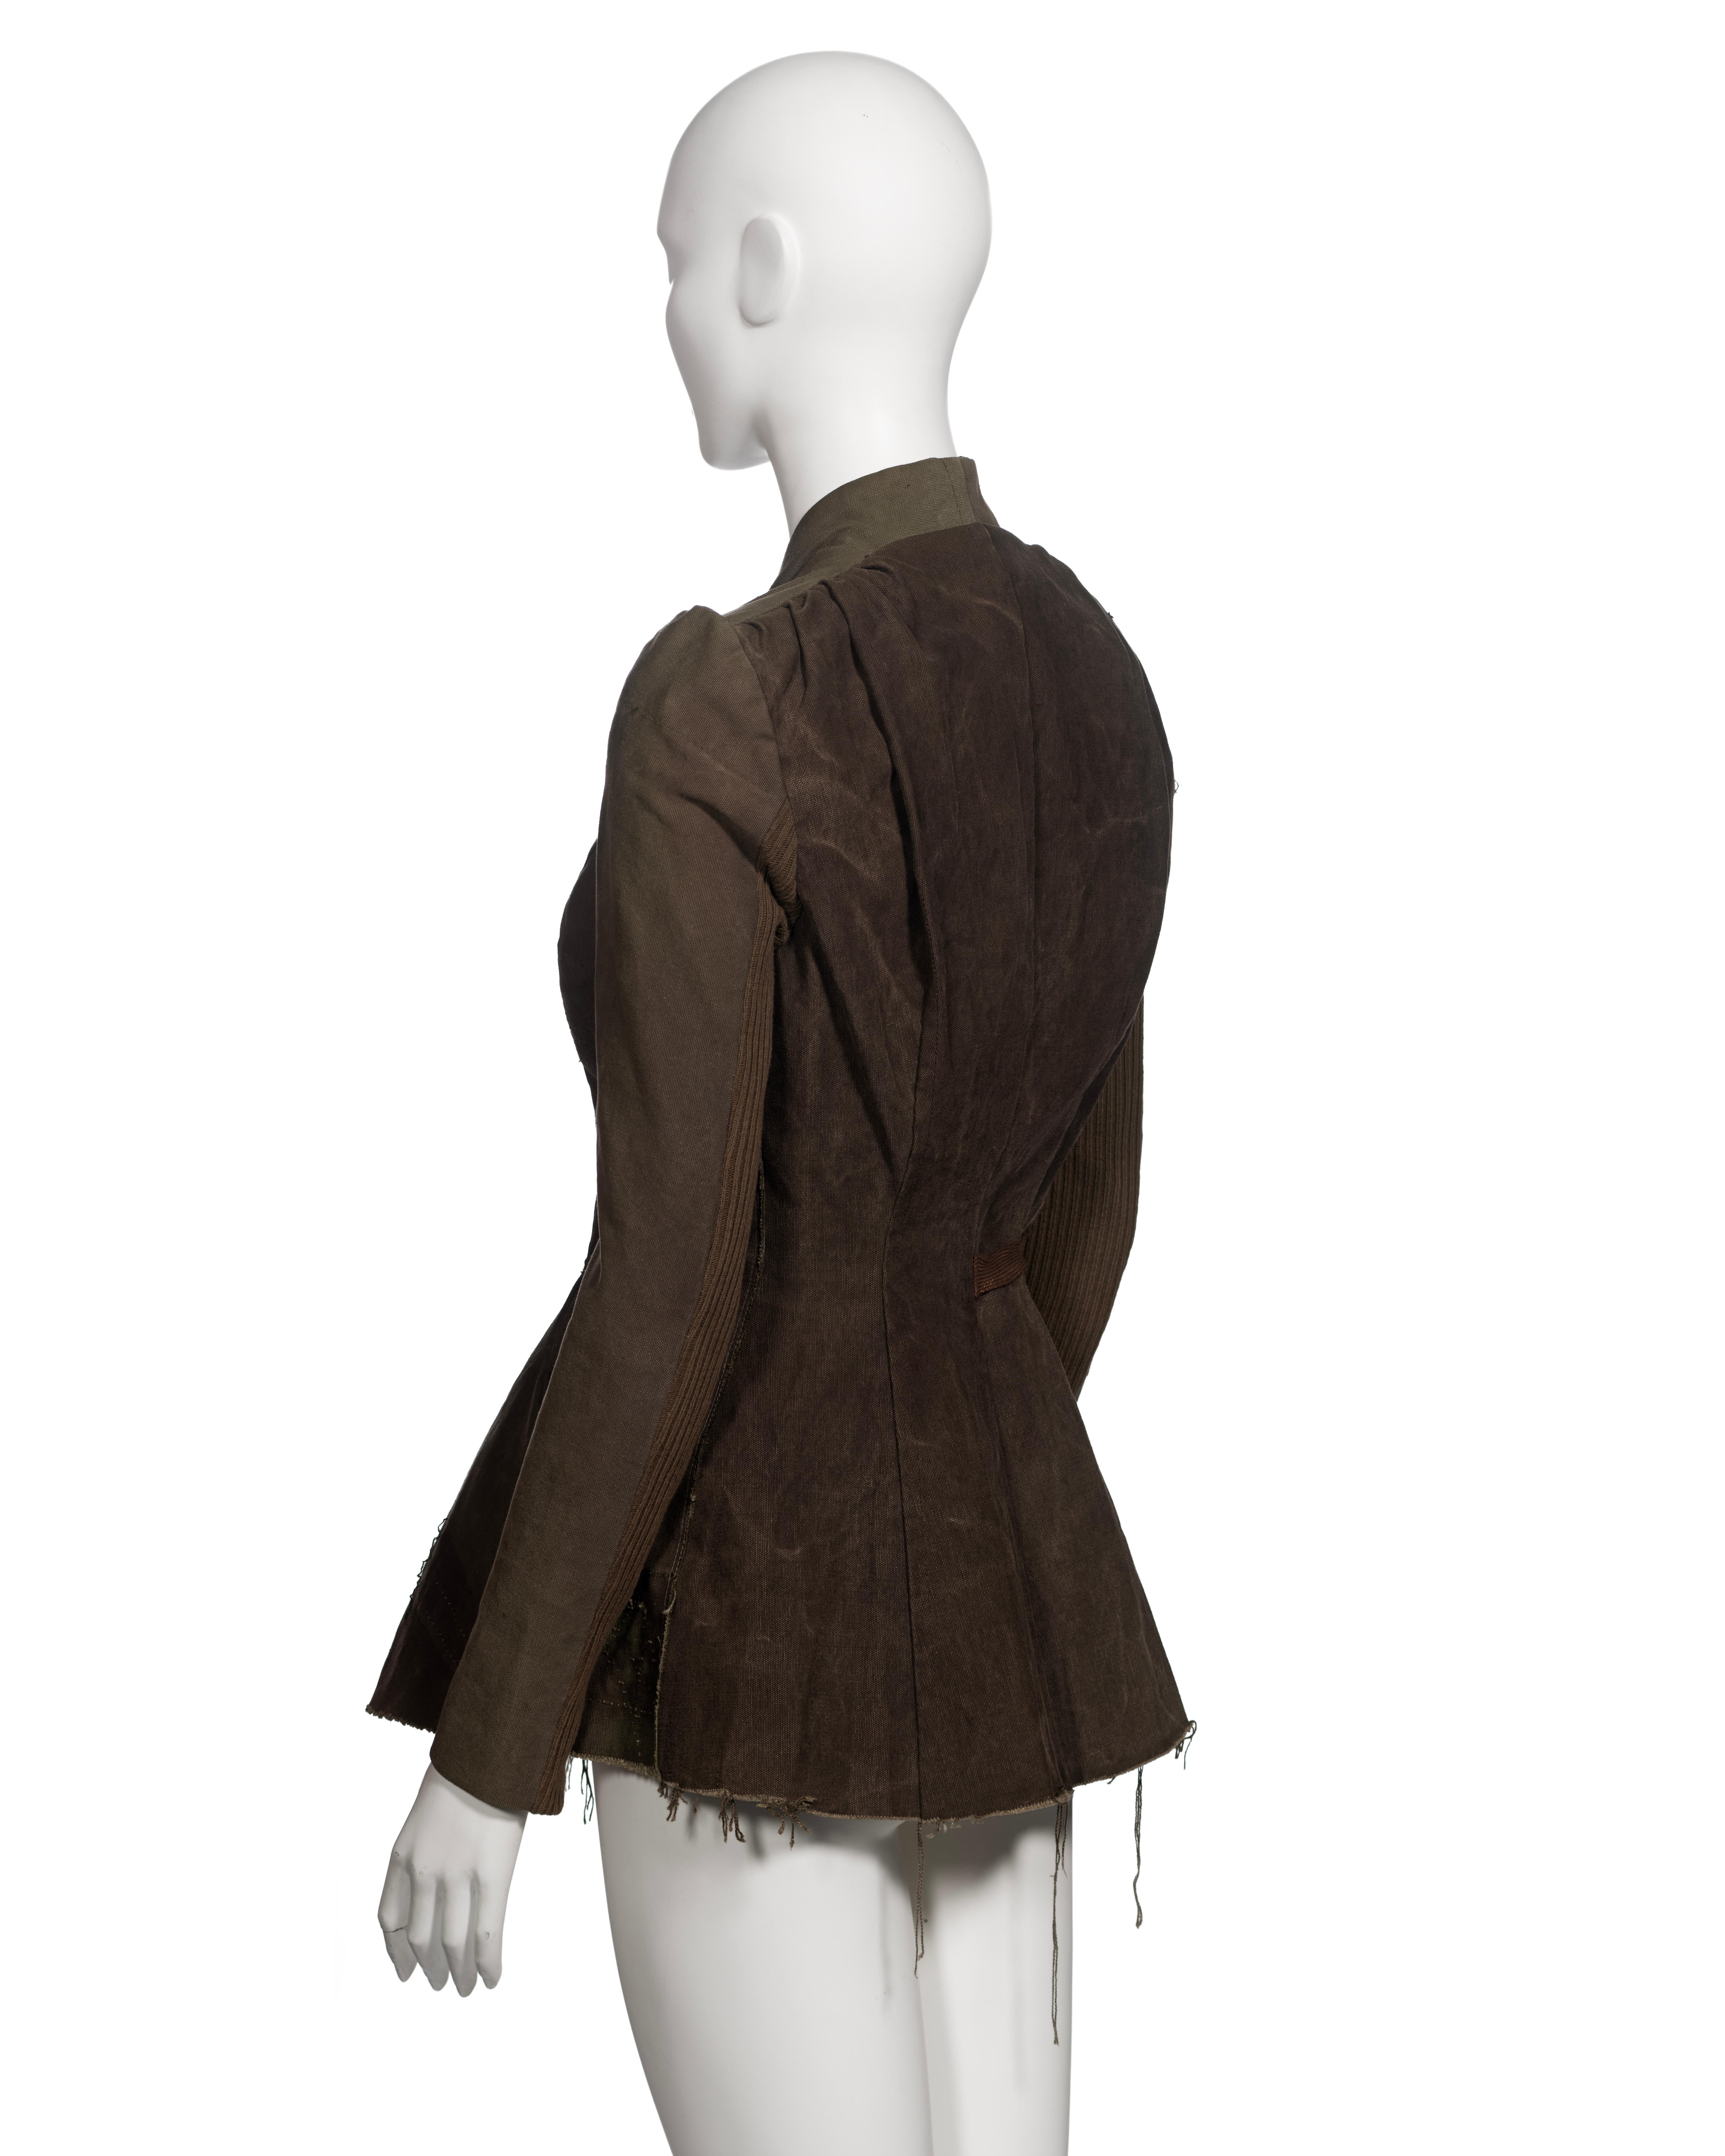 Rick Owens Jacket Made From Deconstructed Military Surplus Bags, c. 1998 10